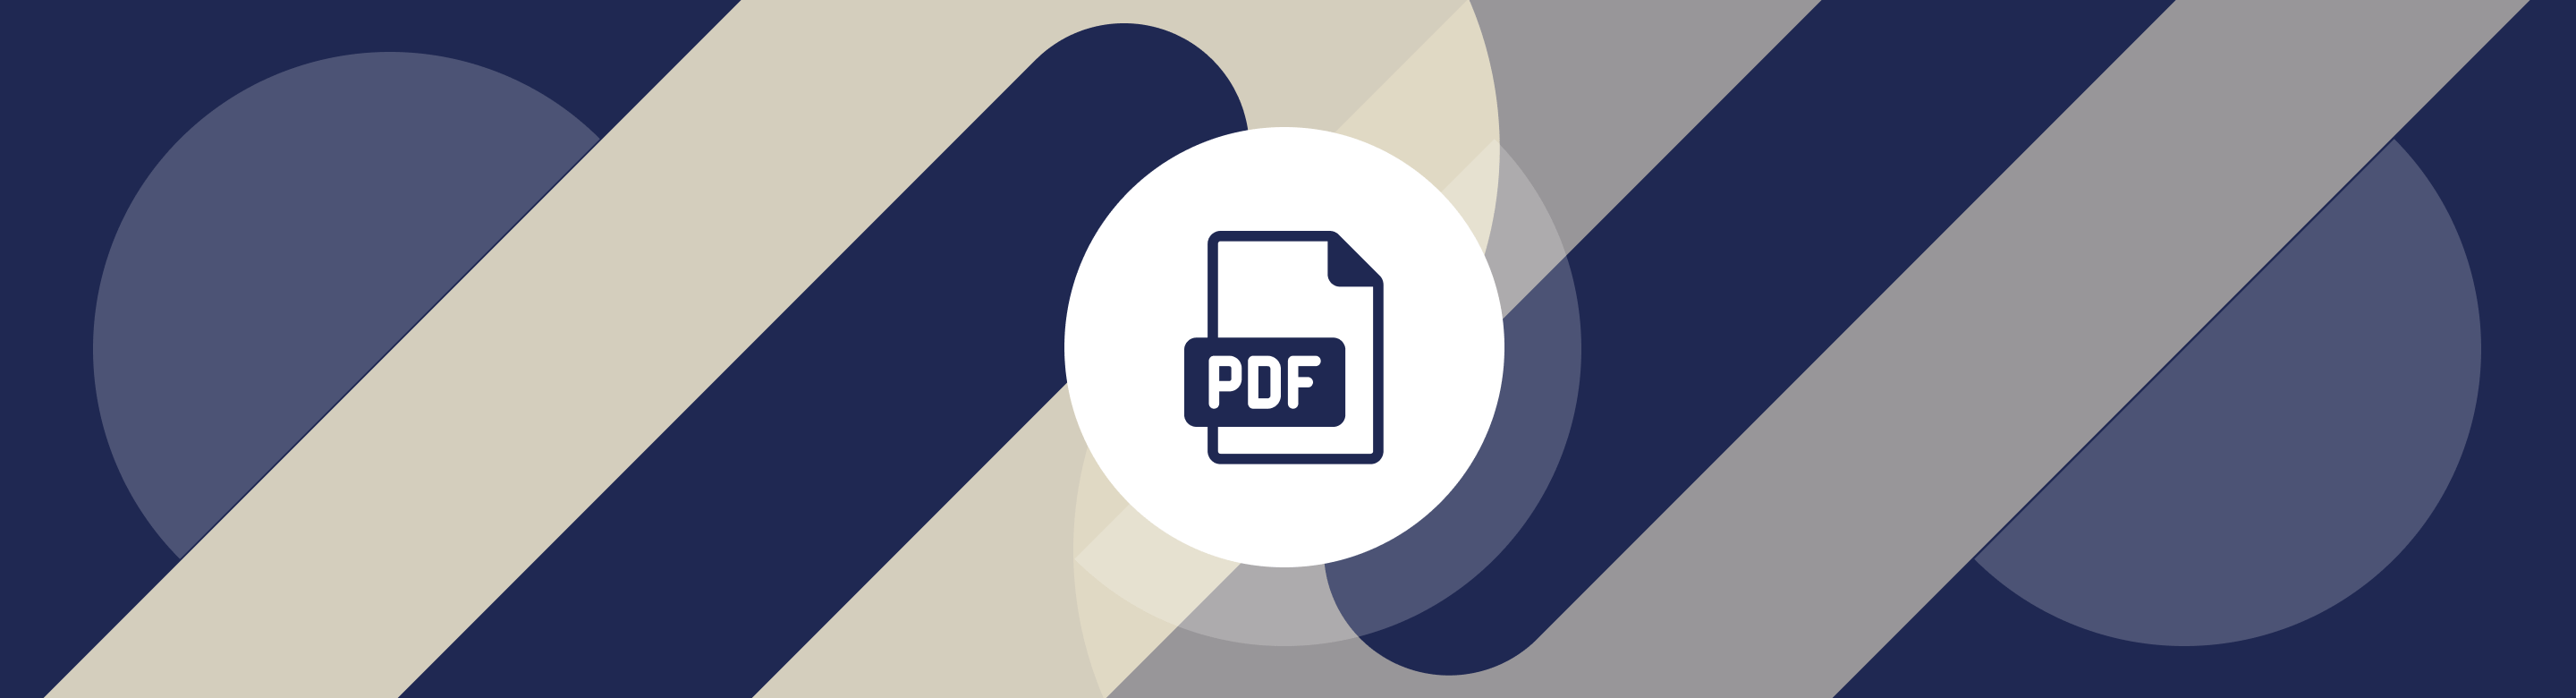 Make WordPress PDFing Simple, Easy, Fast & Flexible With Forminator’s New PDF Generator Addon